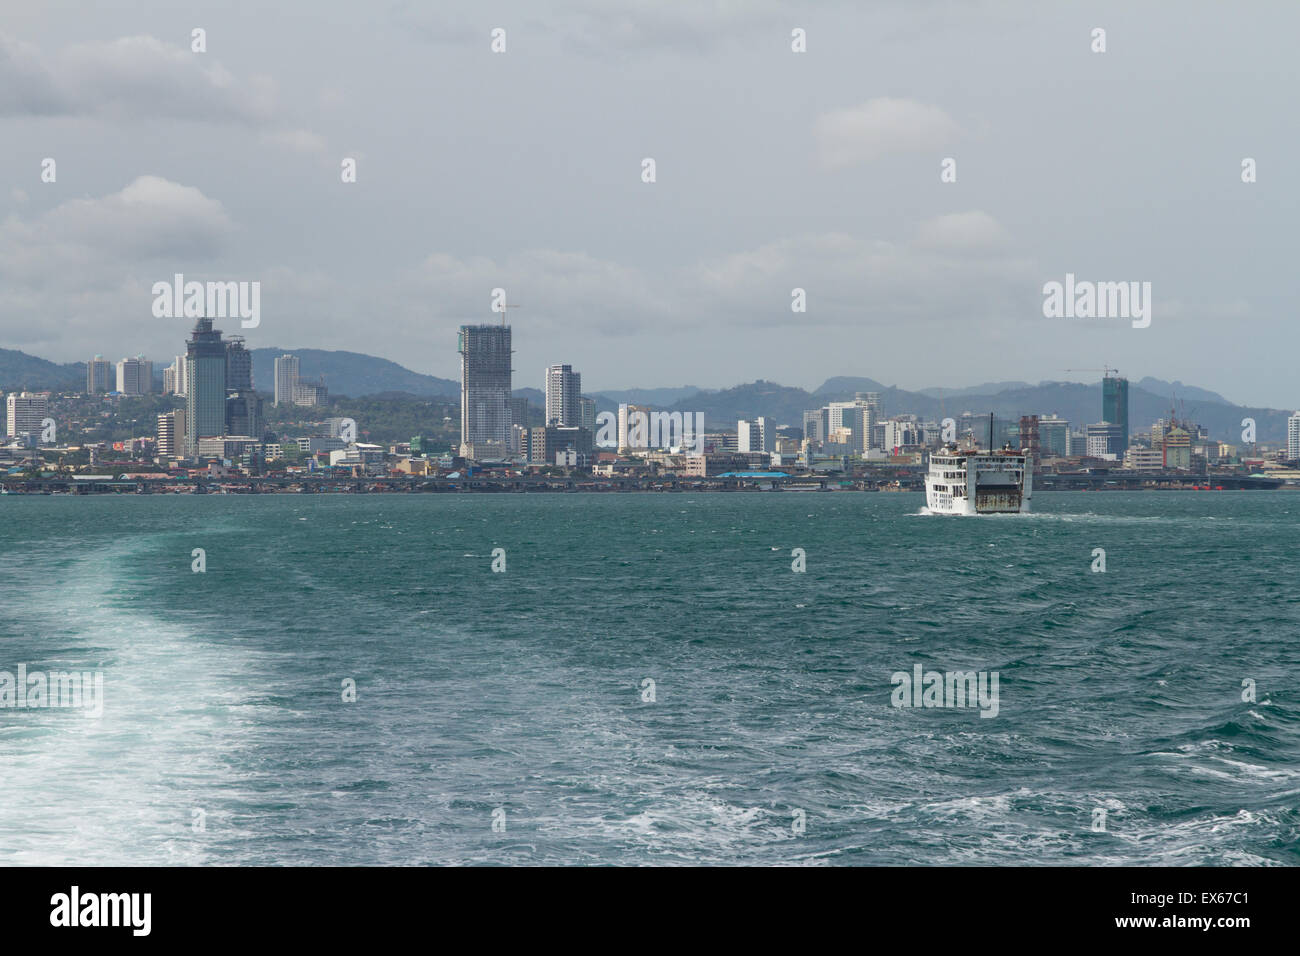 Skyline View of Cebu City from Lite Ferry with Wake Trailing in Water Behind Boat on Island of Cebu, Philippines Stock Photo